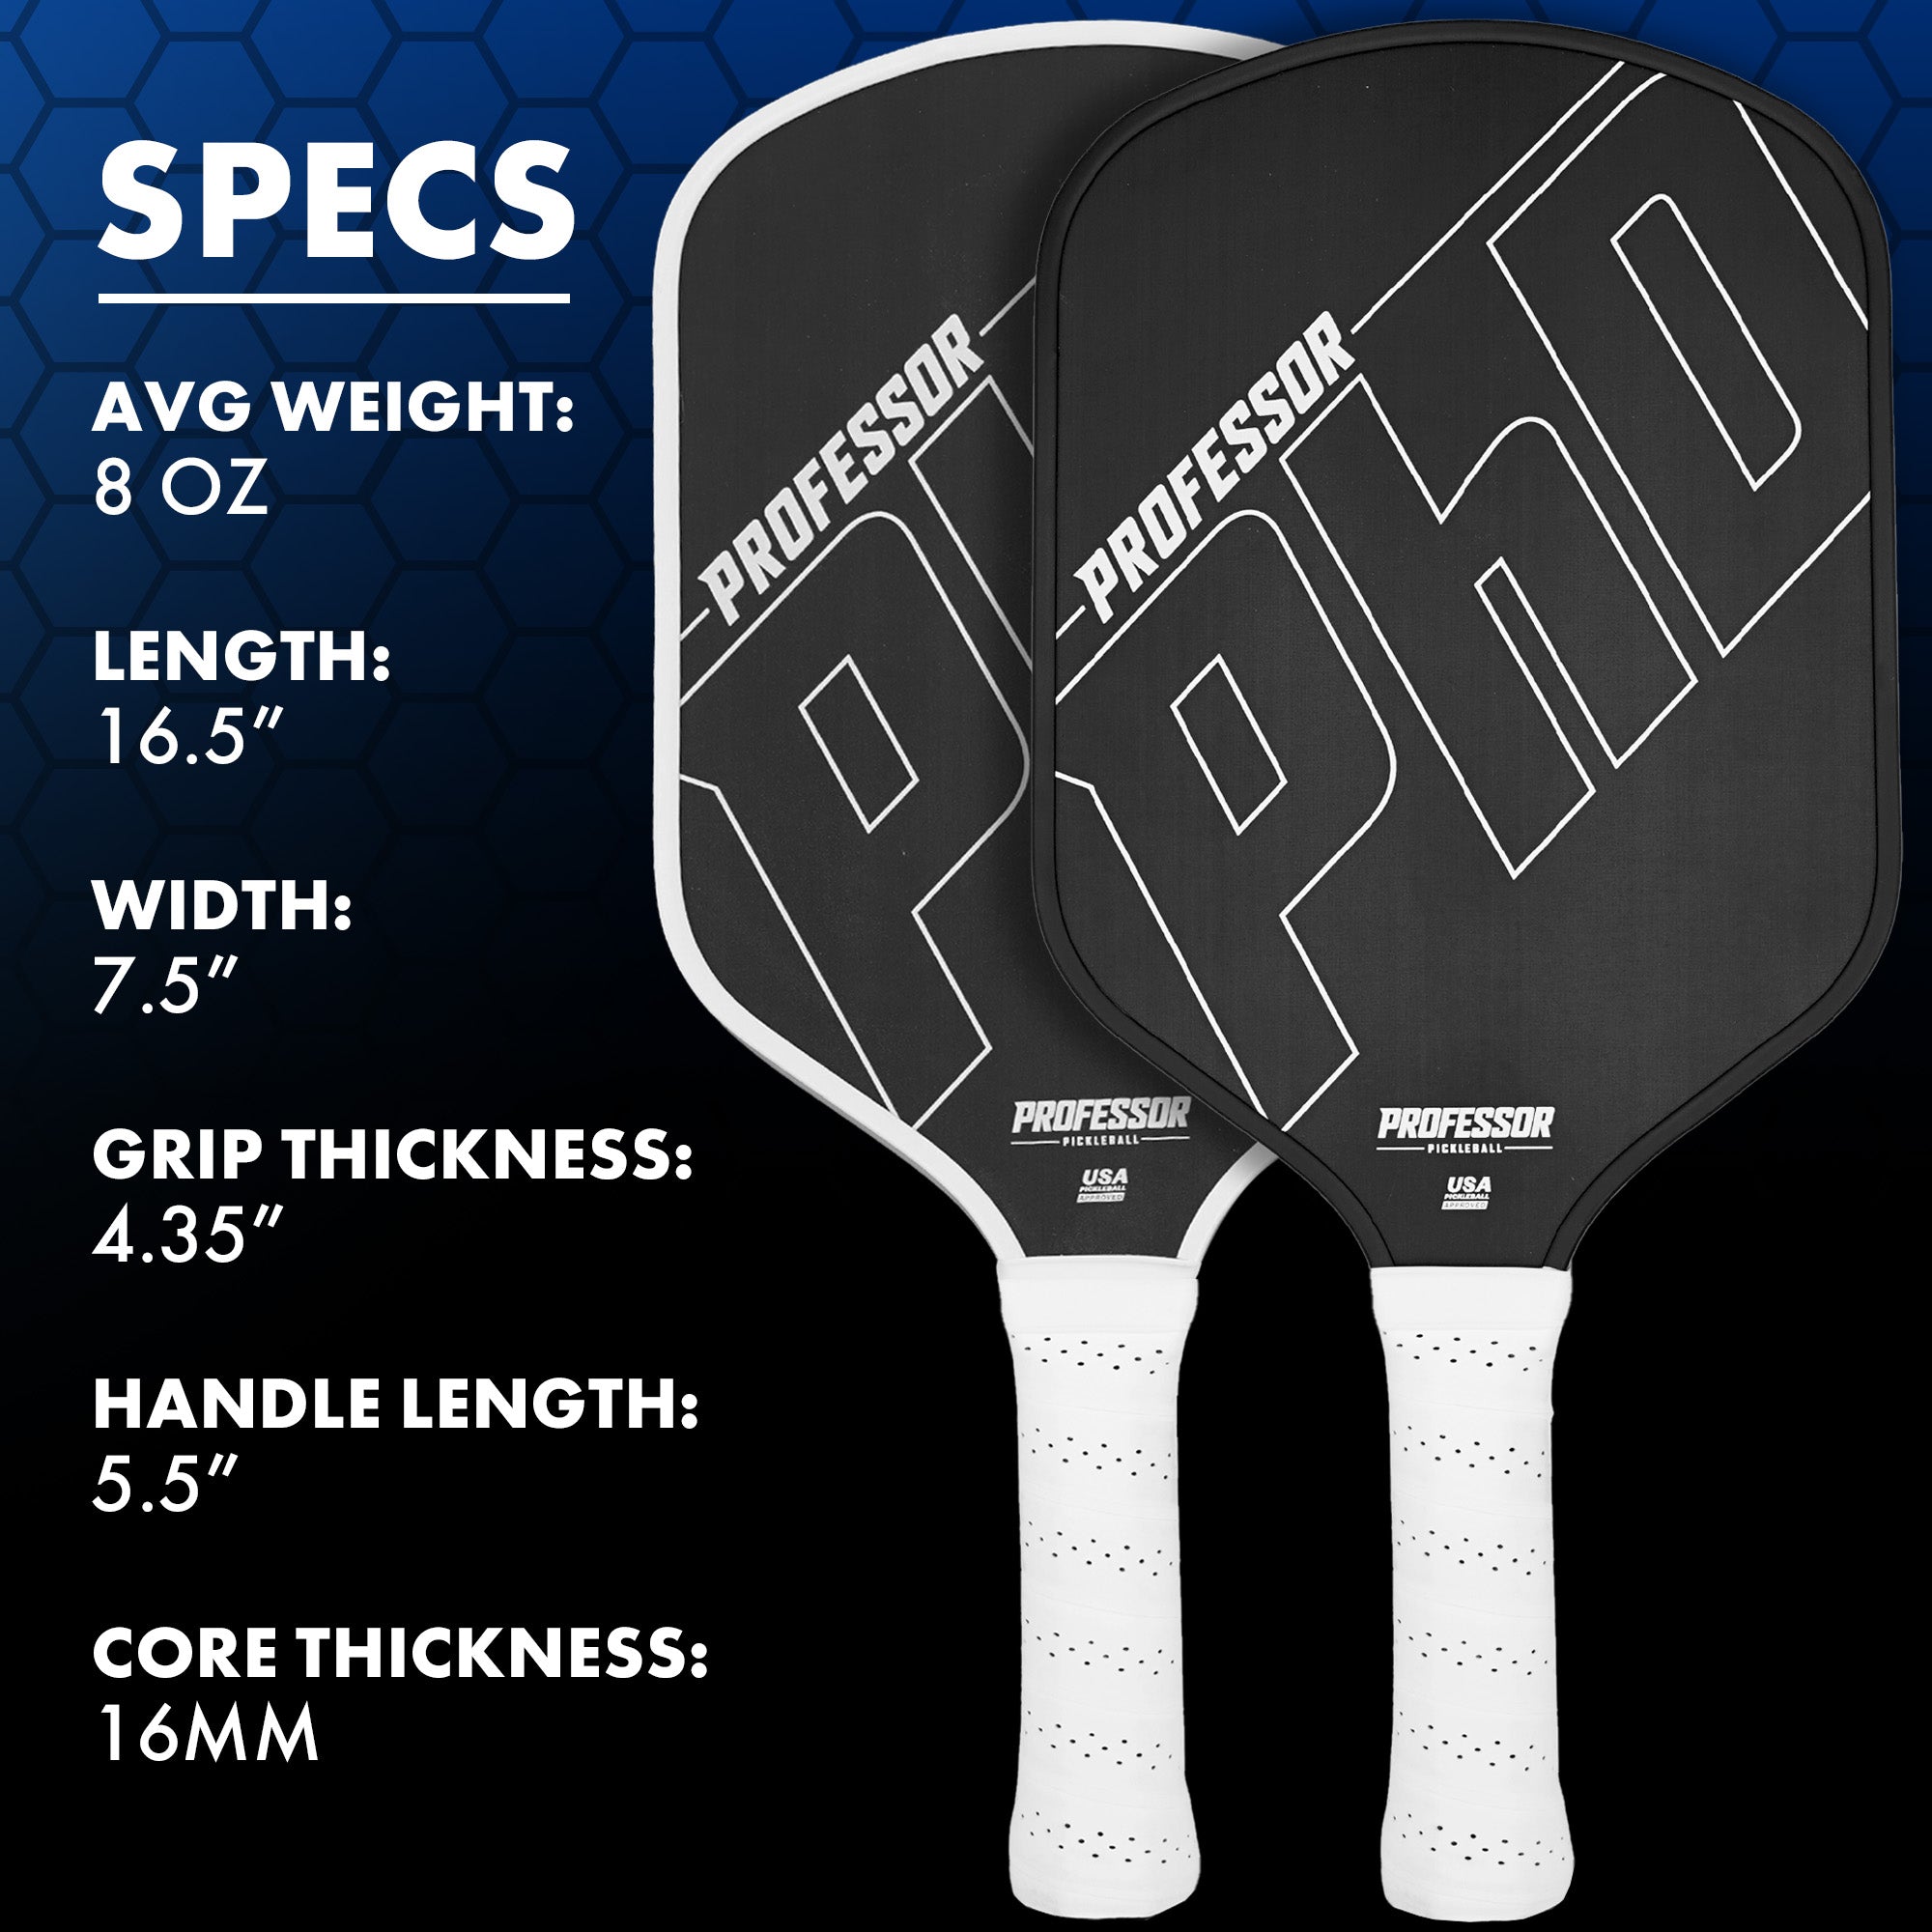 White PhD 16MM Raw Carbon Super Spin Paddle